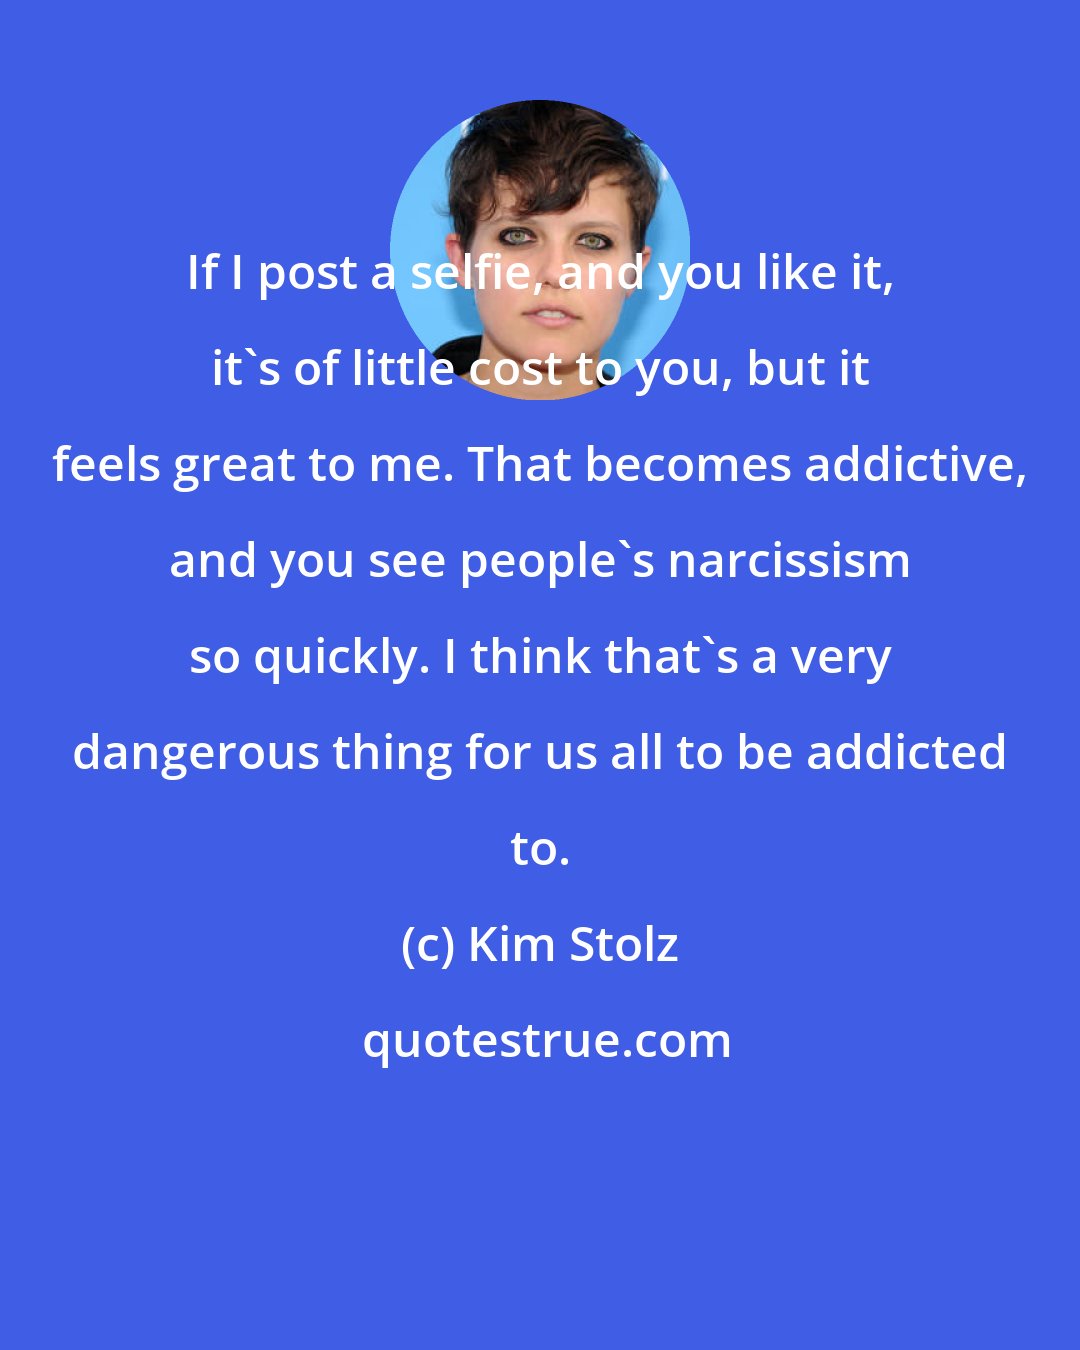 Kim Stolz: If I post a selfie, and you like it, it's of little cost to you, but it feels great to me. That becomes addictive, and you see people's narcissism so quickly. I think that's a very dangerous thing for us all to be addicted to.